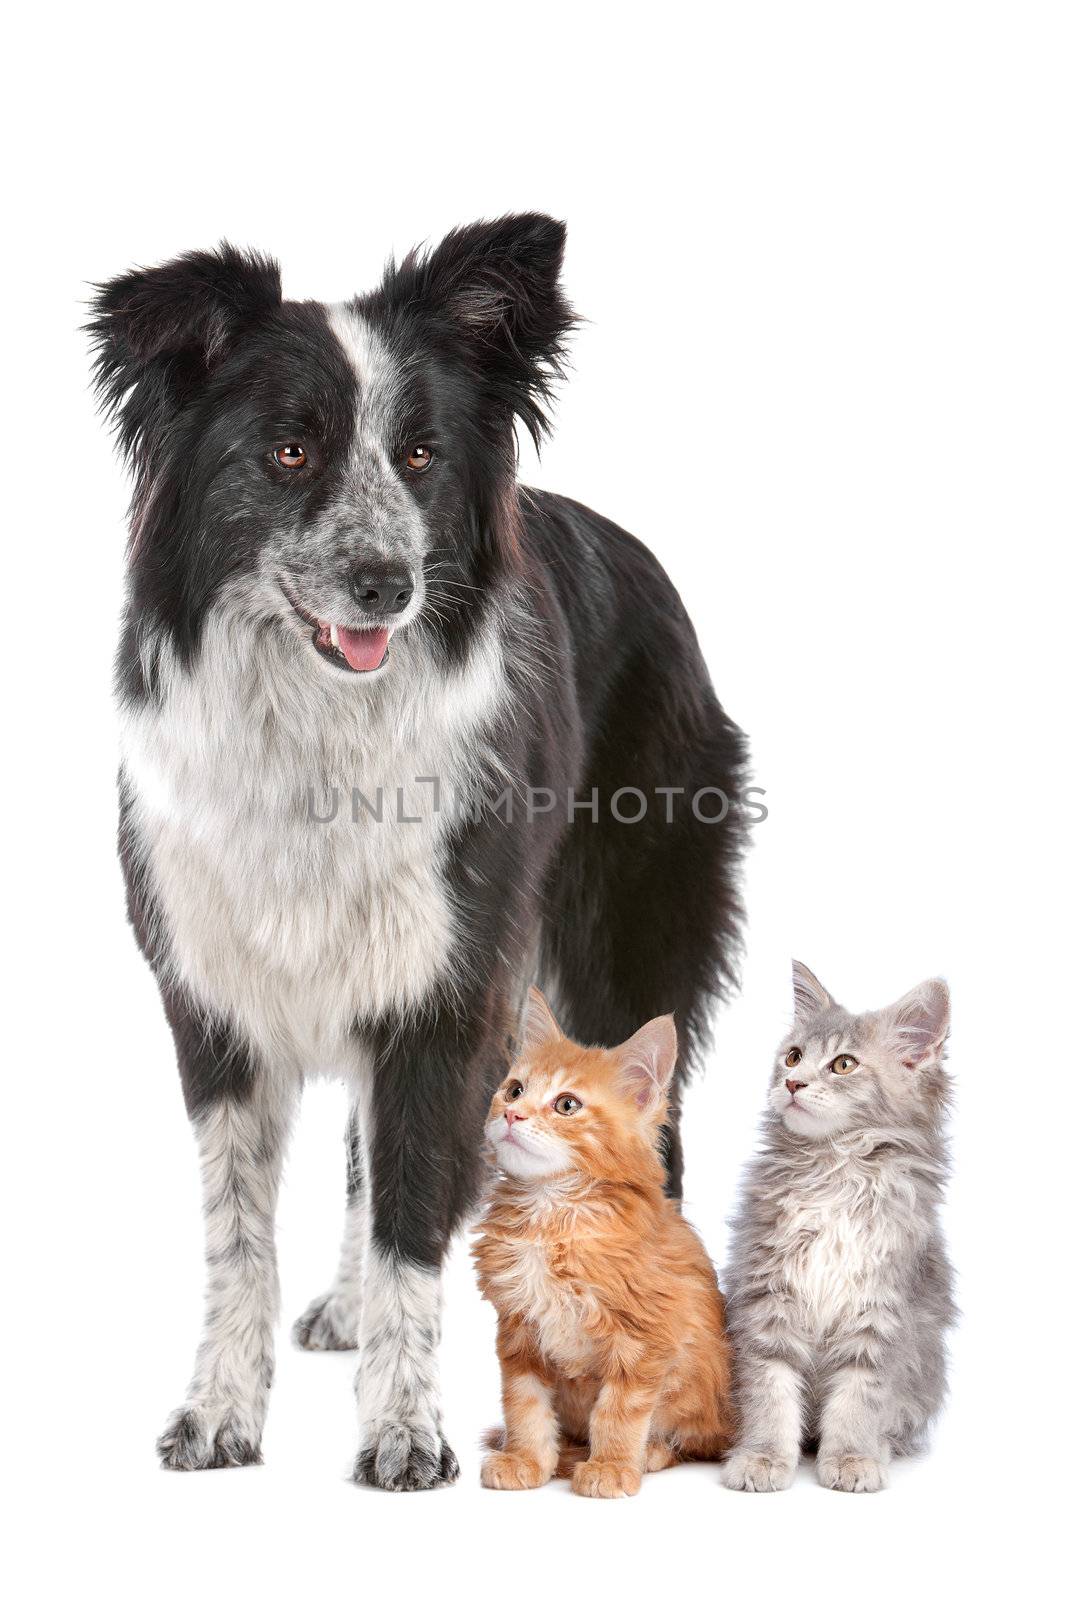 Border collie sheepdog standing  next to two kittens.